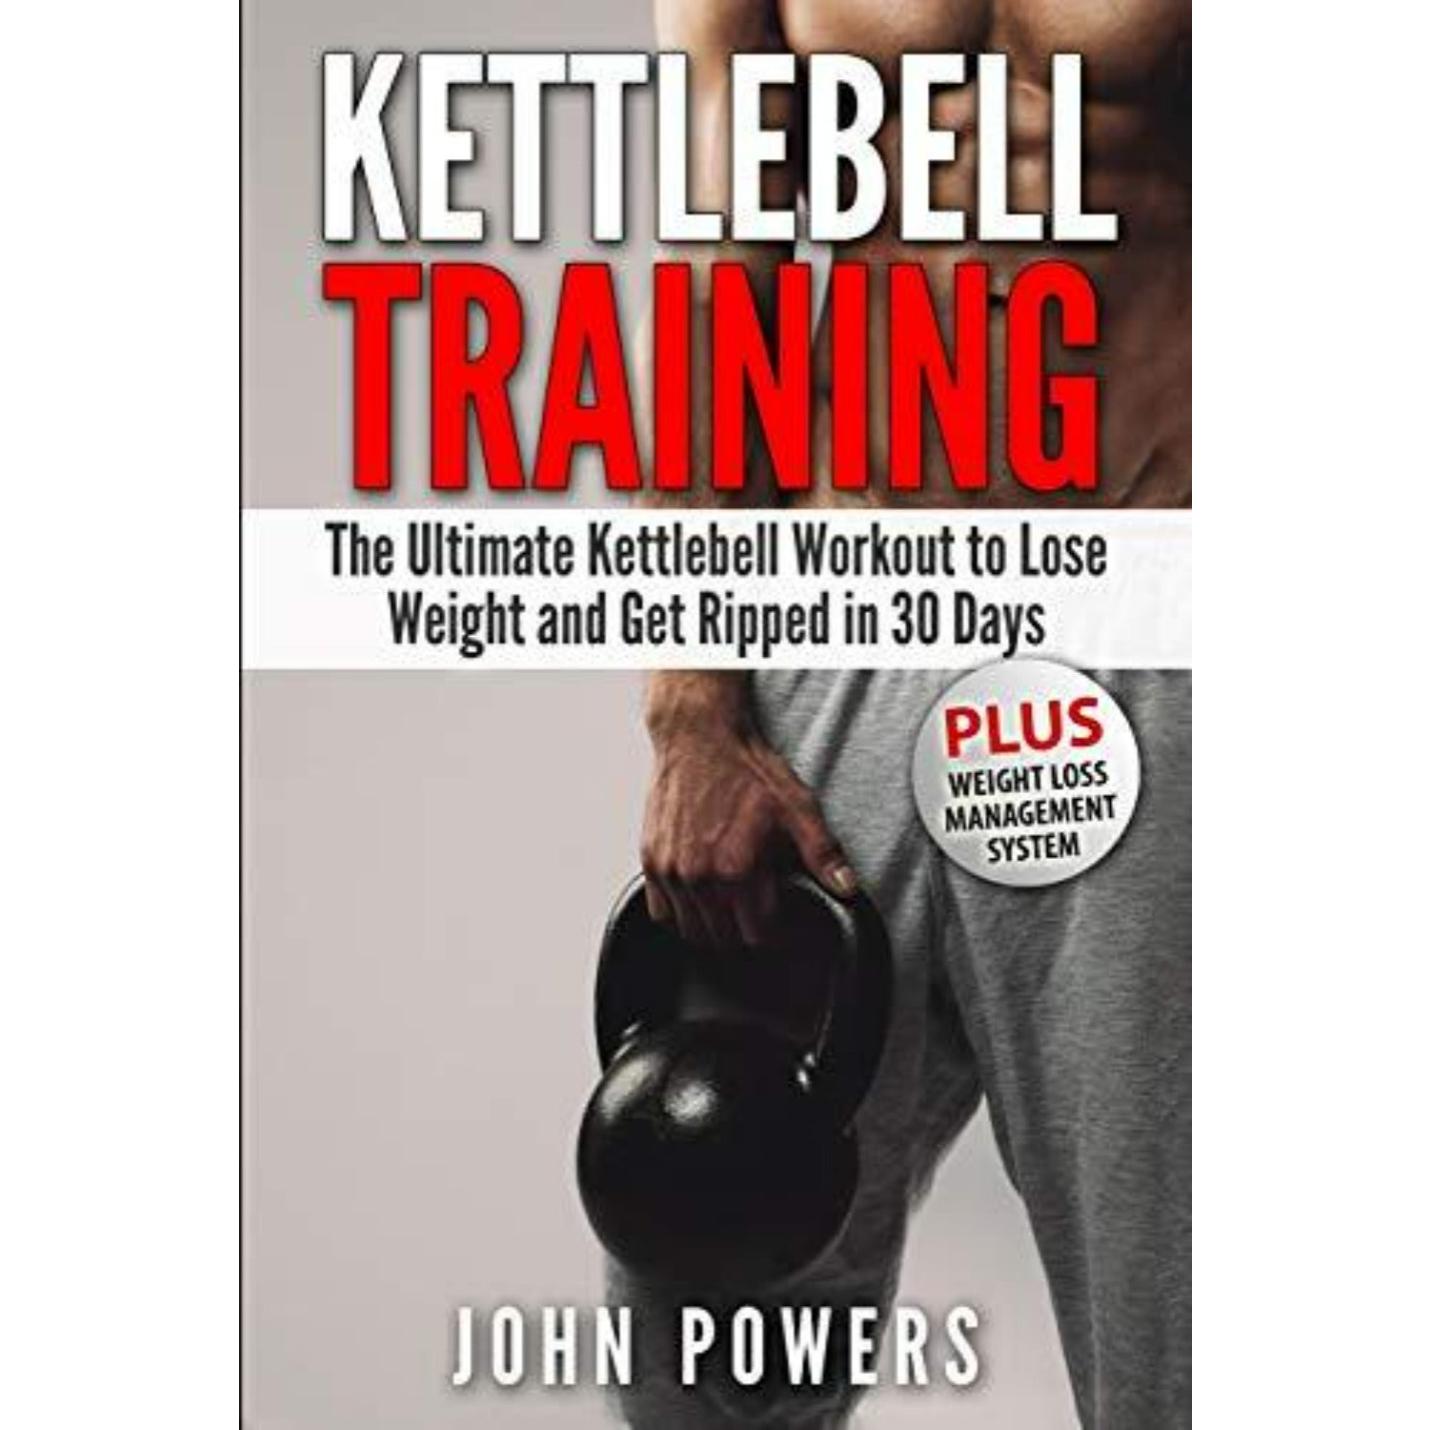 Kettlebell Training: The Ultimate Kettlebell Workout to Lose Weight and Get Ripped in 30 Days - kettlebell oefeningen - happygetfit.com